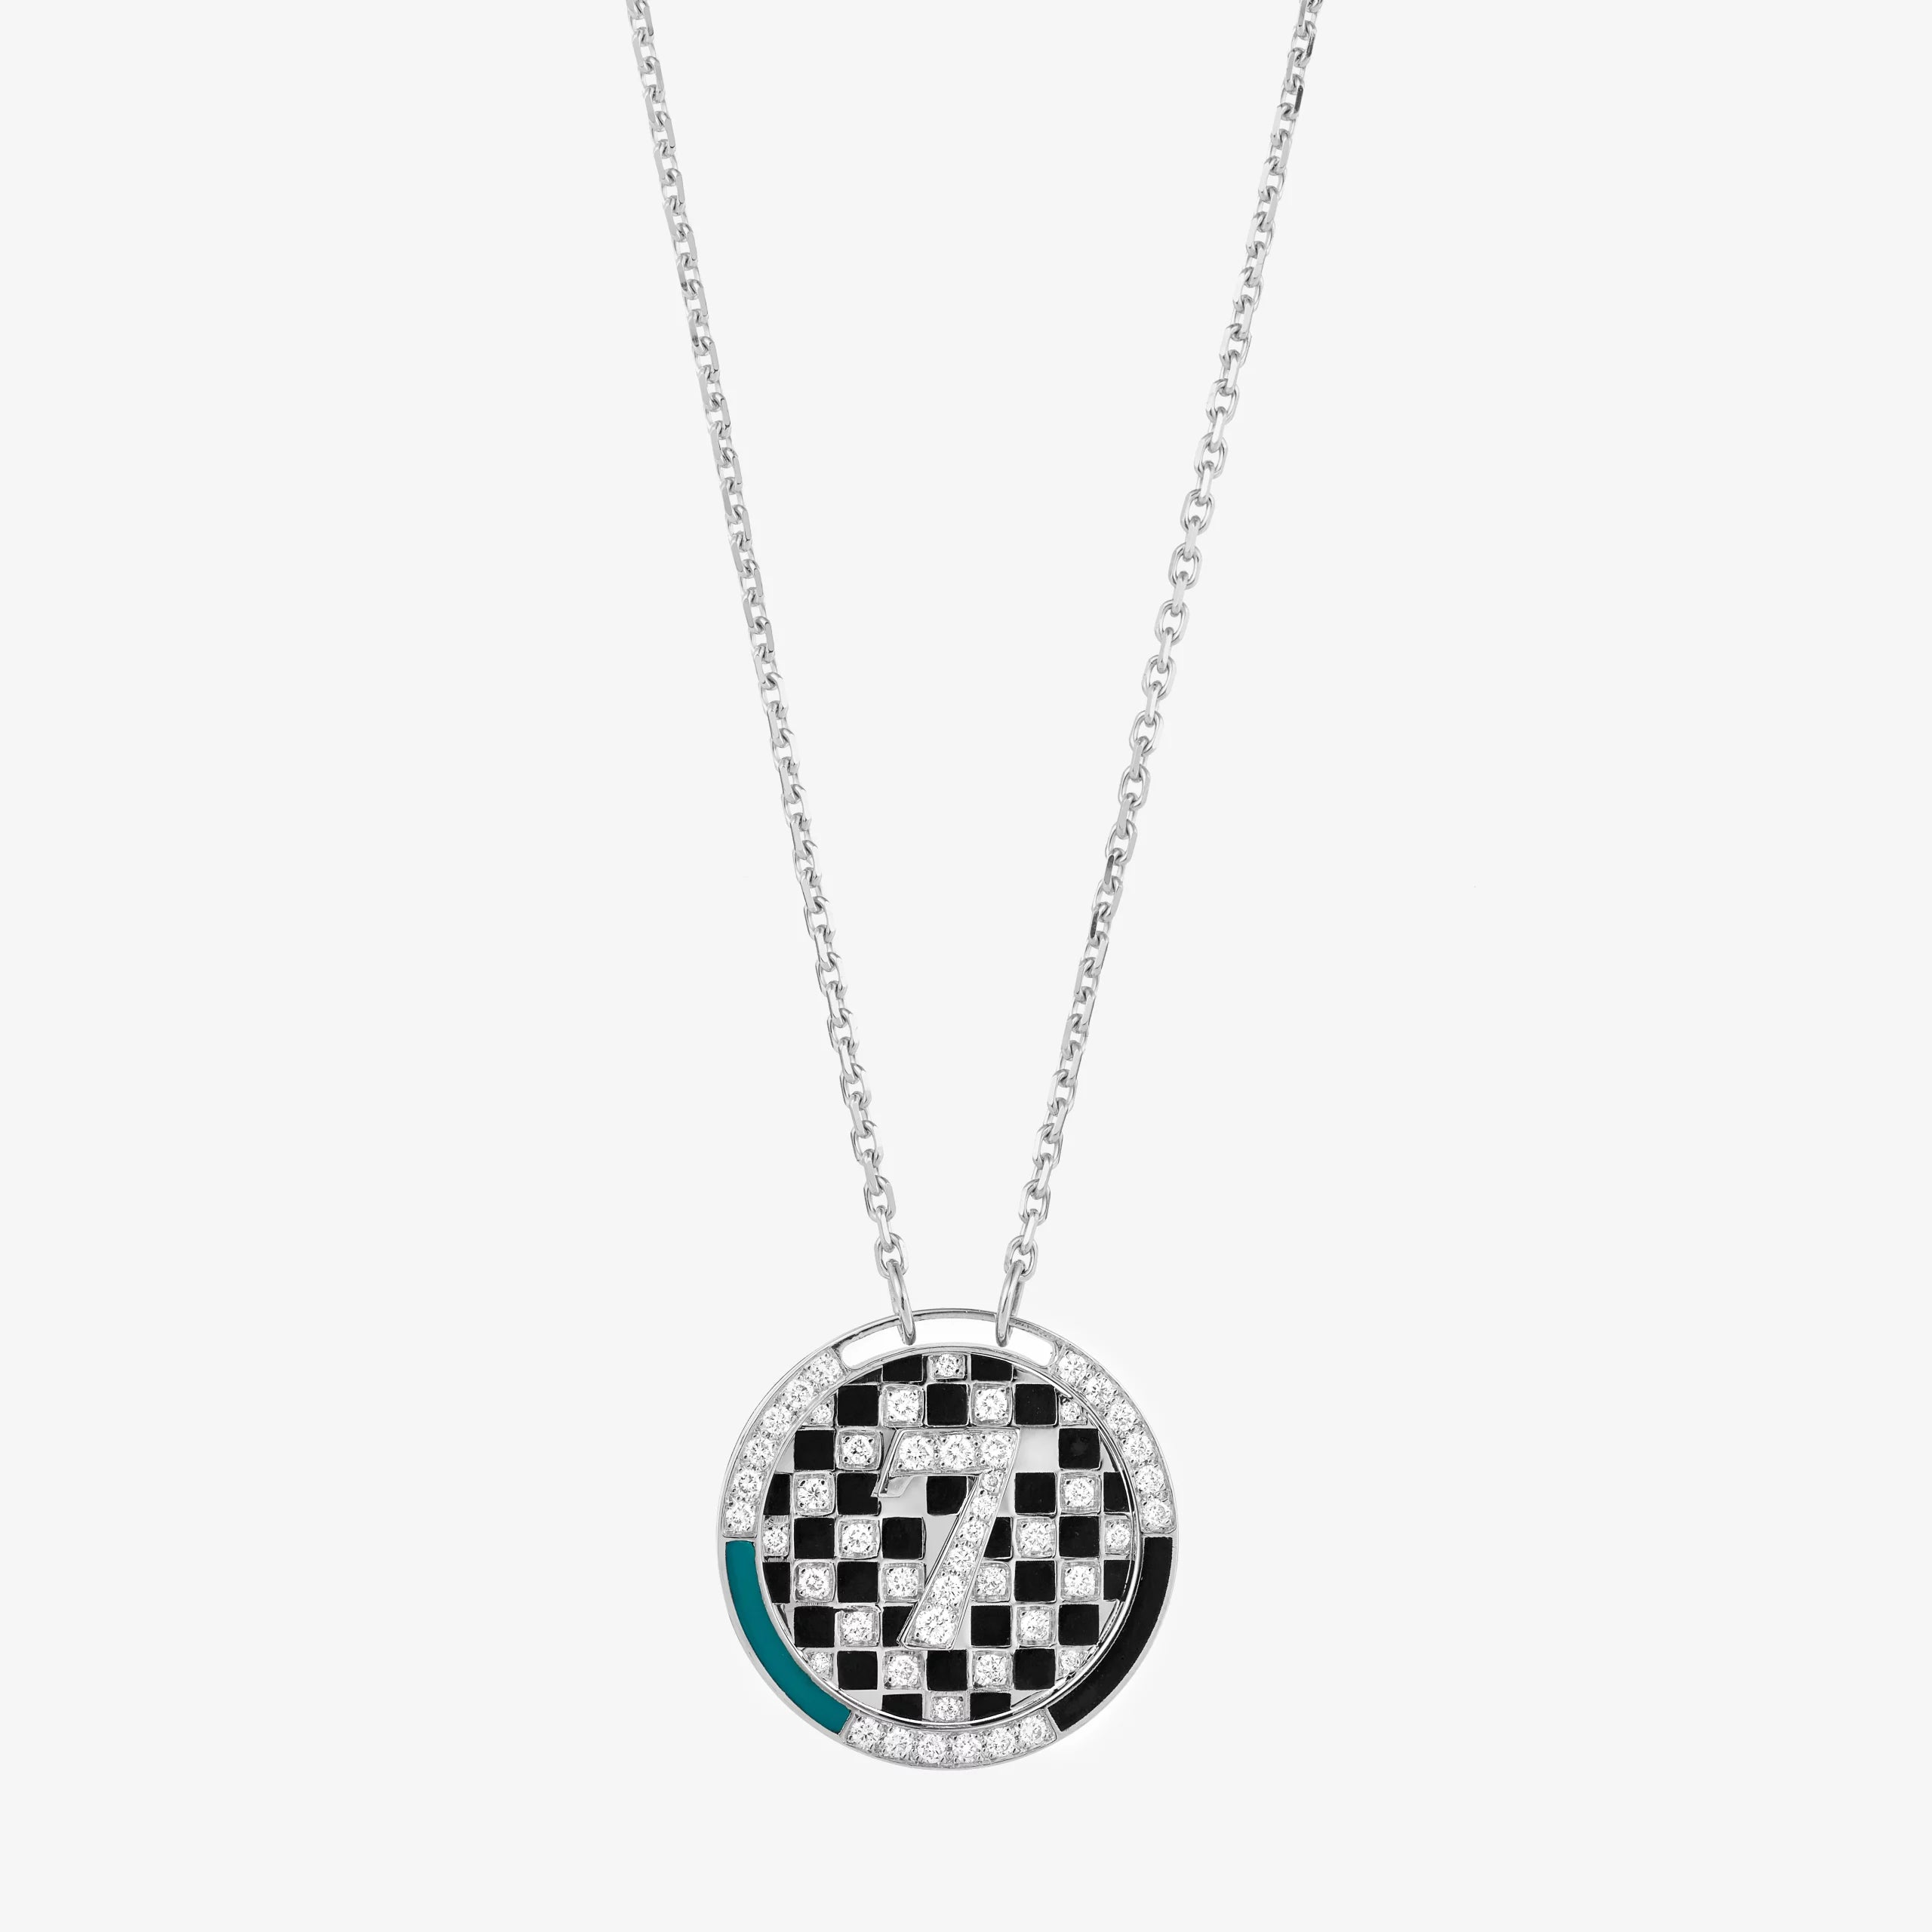 Collier médaille chess or blanc vue face